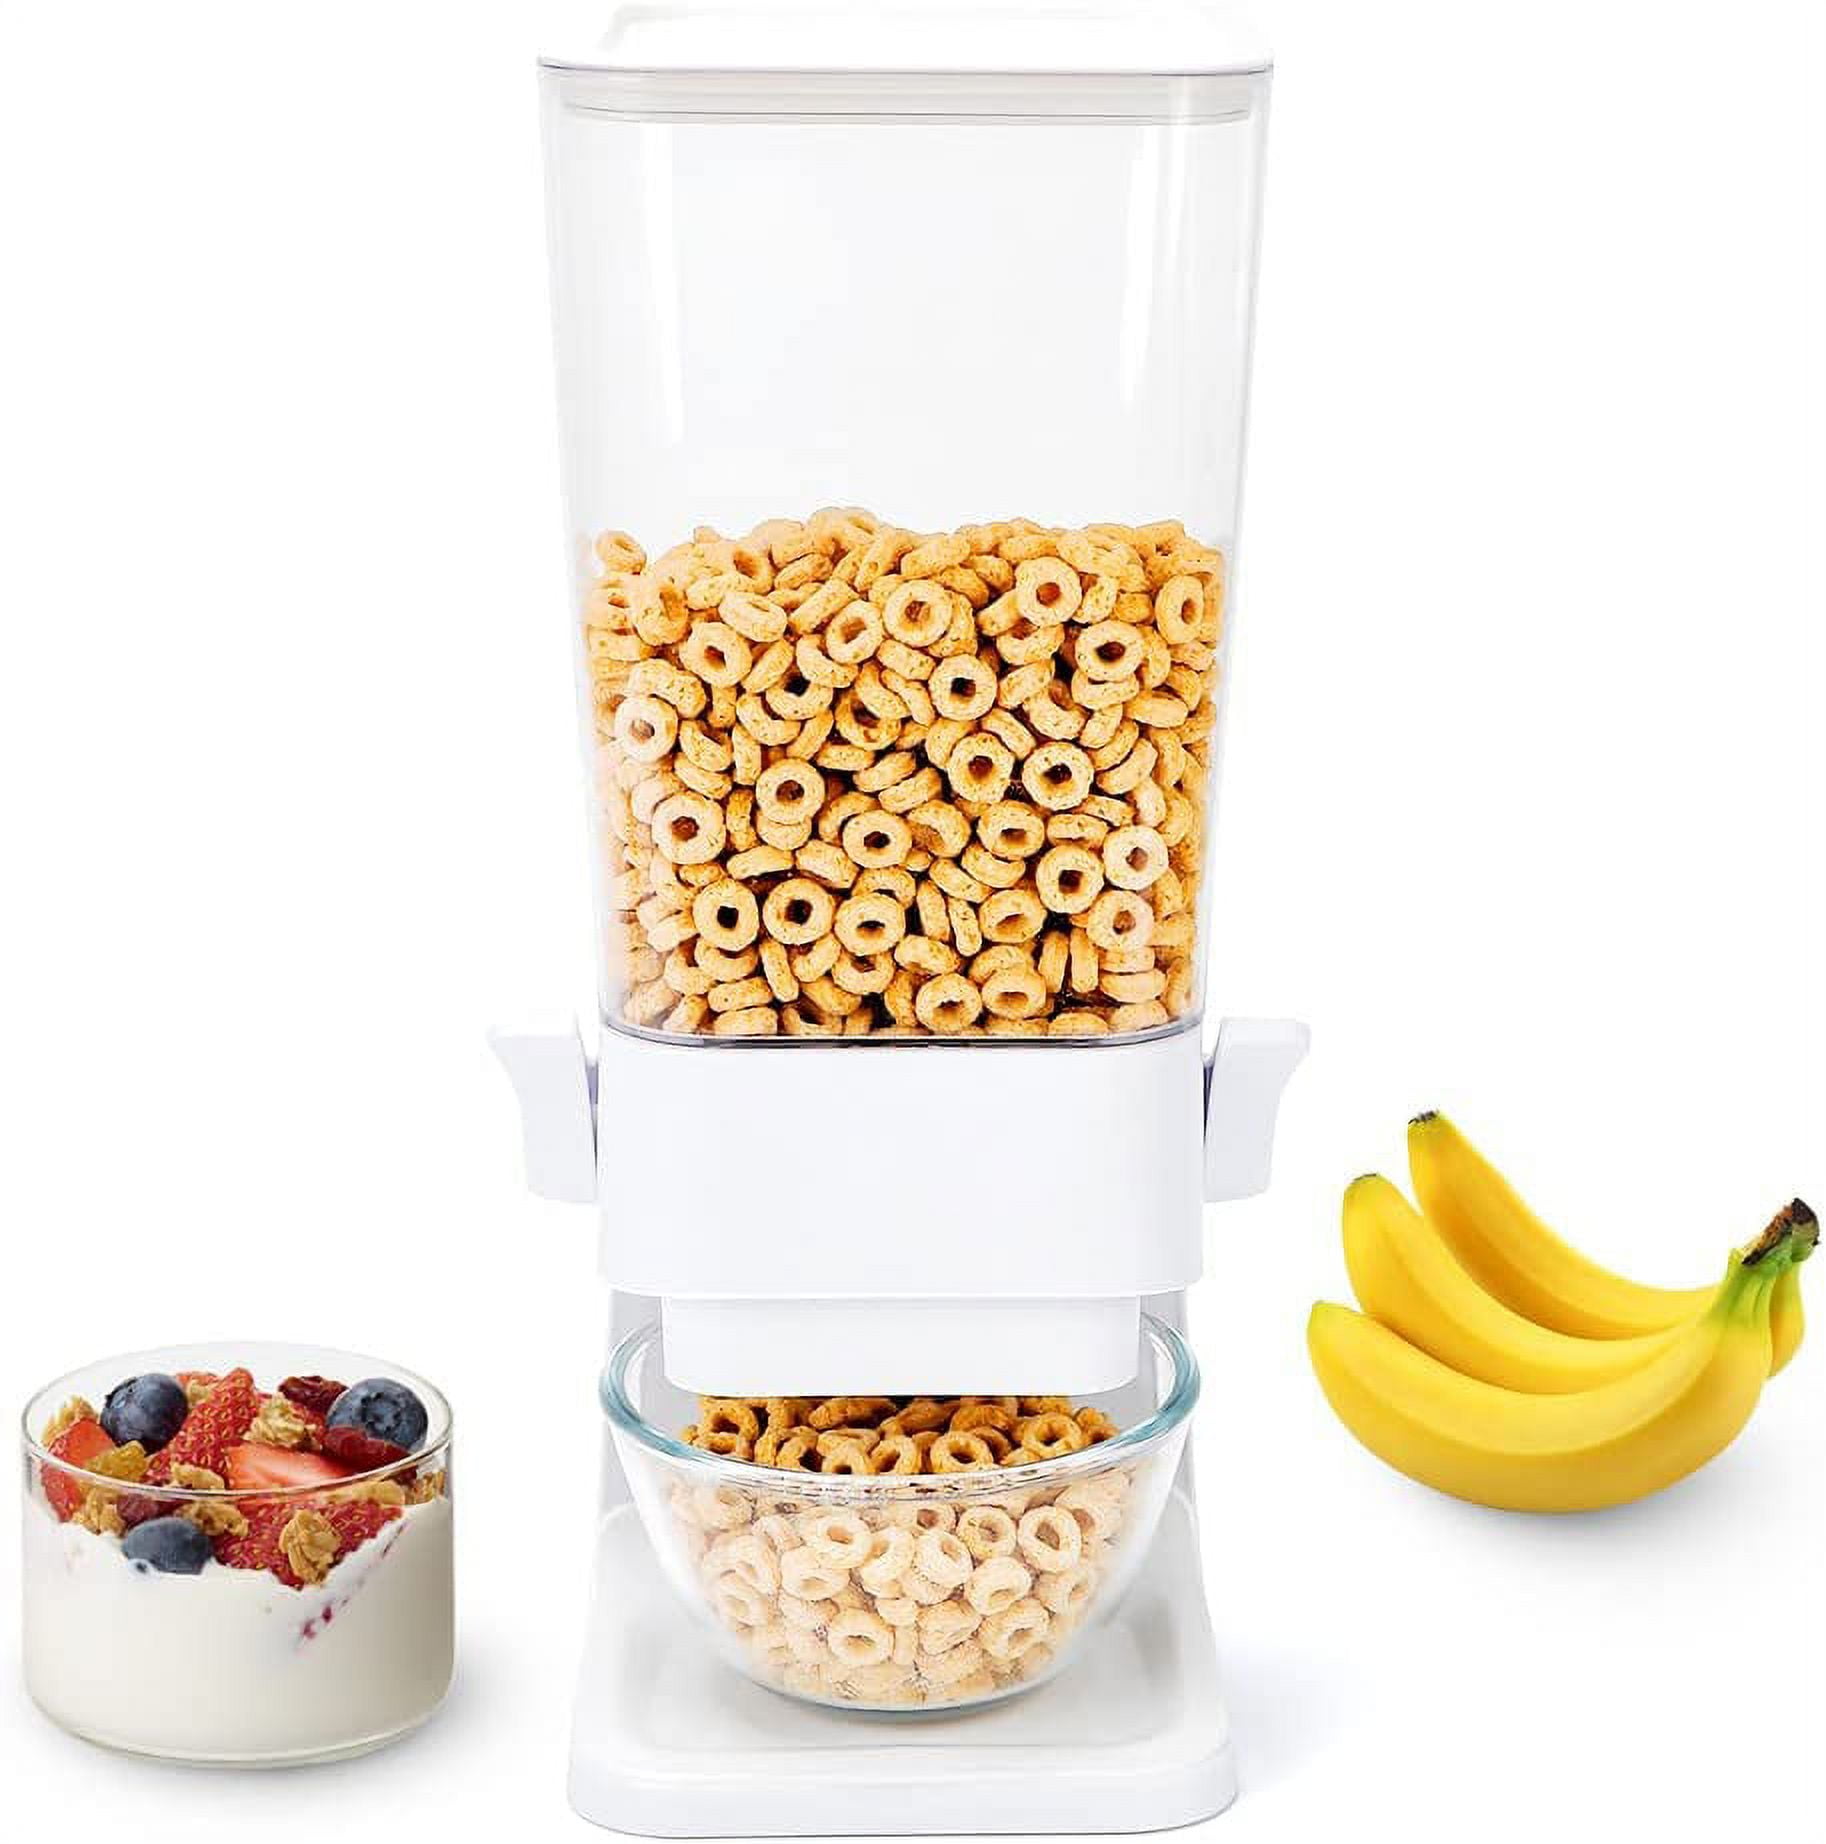 Conworld Cereal Dispenser Countertop, Cereal Dispenser for Pantry, Big Dry  Food Cereal Dispenser, Not Easy to Crush Food, Can Hold Cereal, Candy,  Snack, (White, 5.5 Qt)